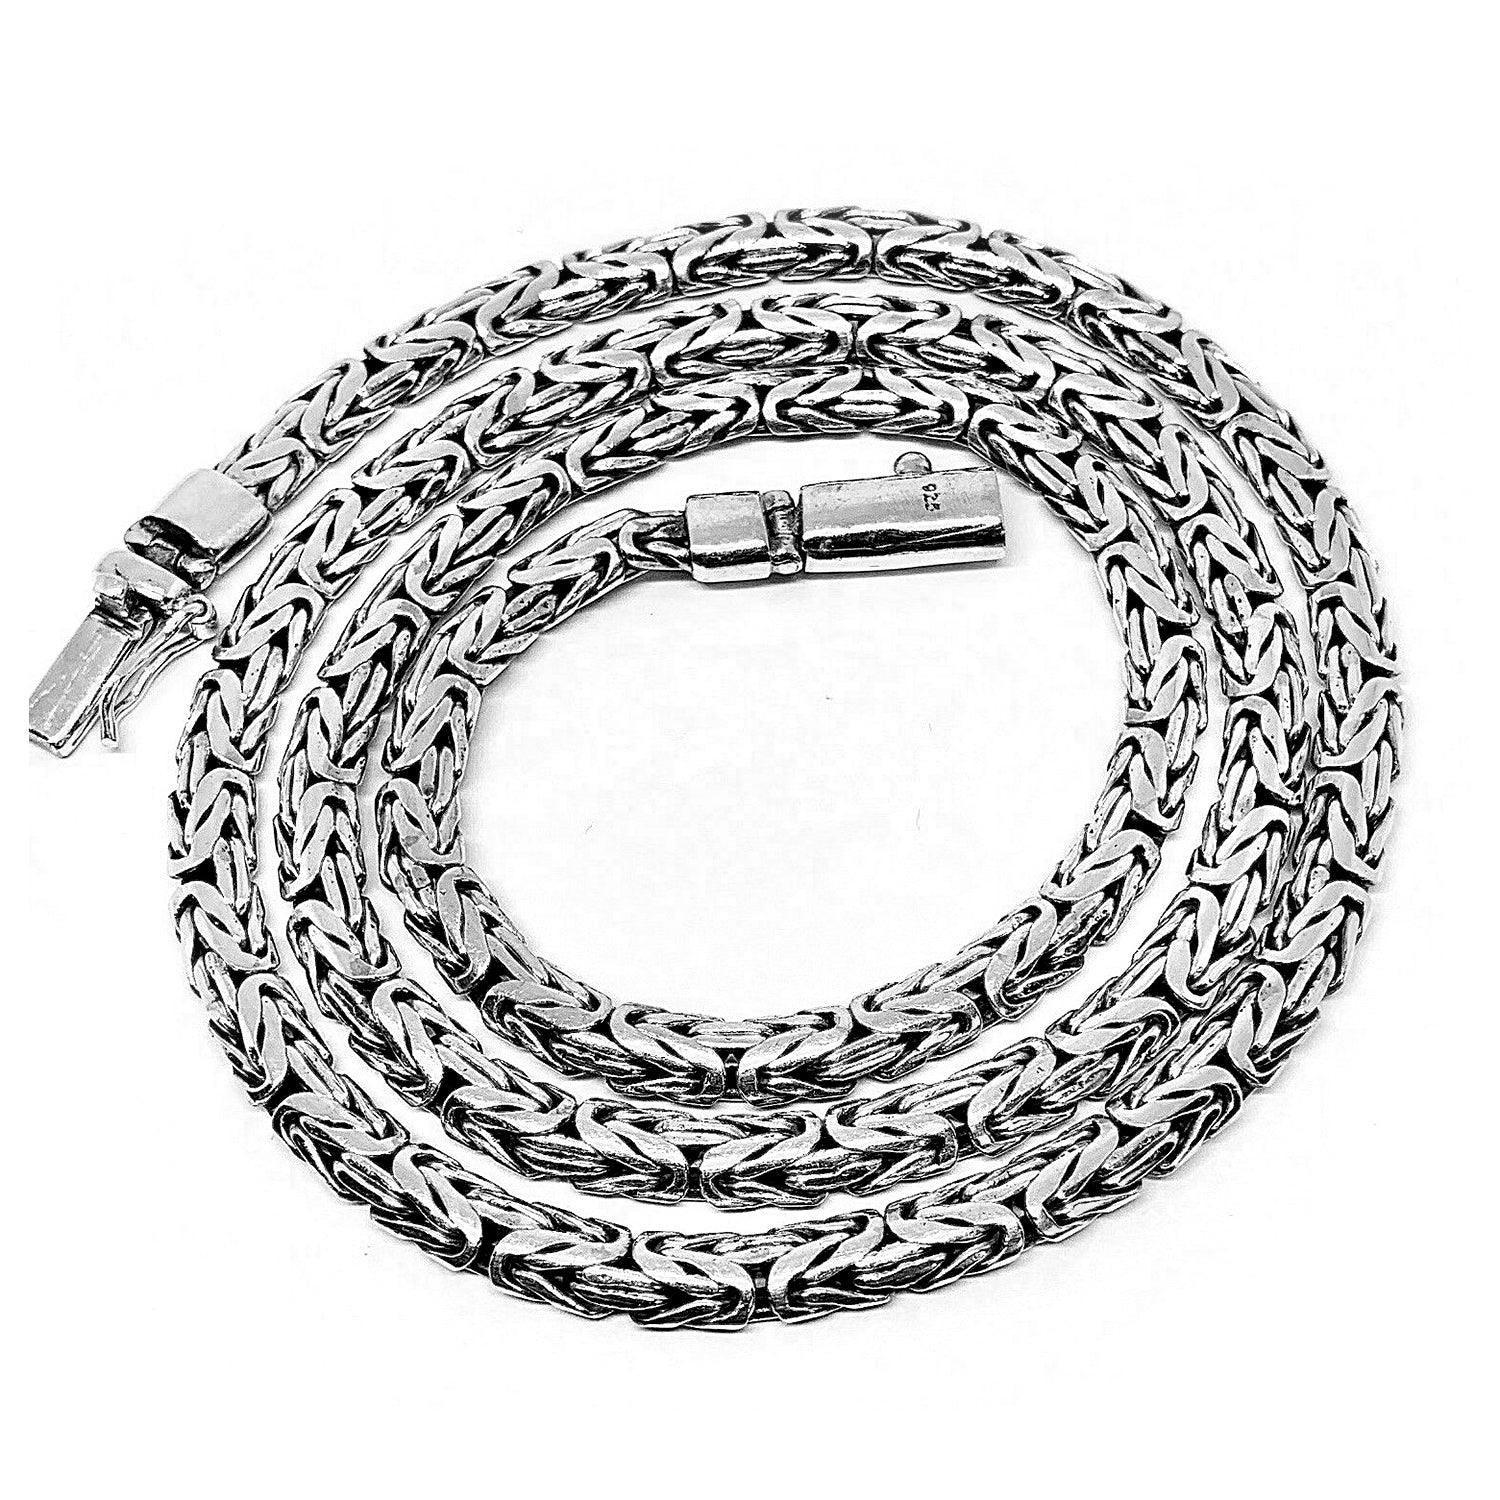 Balinese Sterling Silver 4 mm BYZANTINE Borobudur Chain Necklace - Inspiring Jewellery